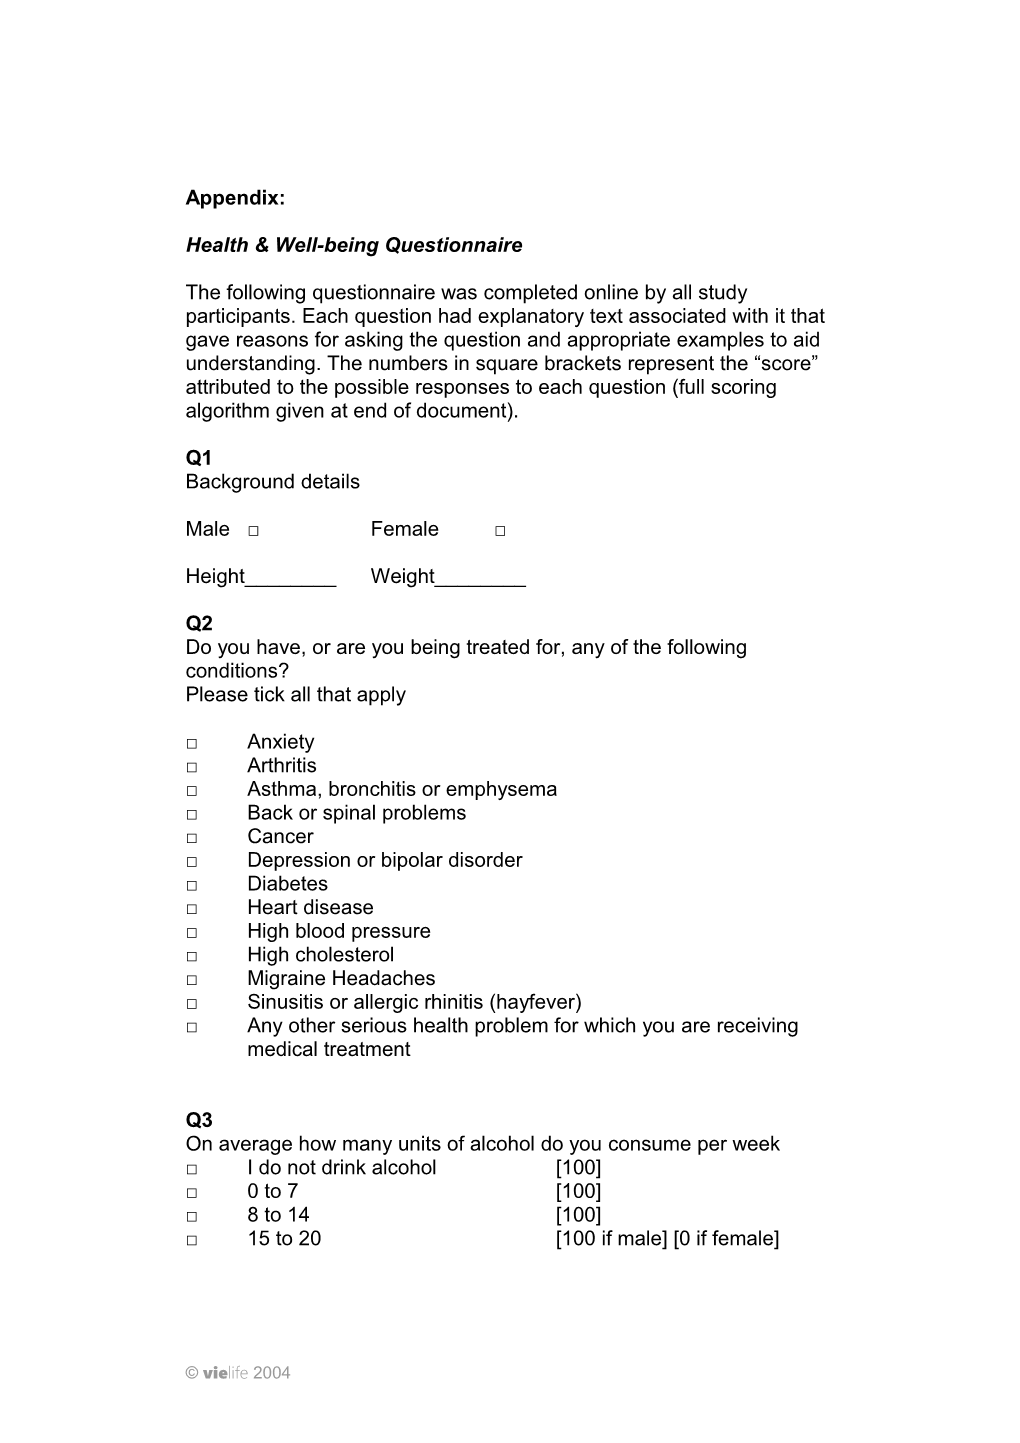 Health & Well-Being Questionnaire